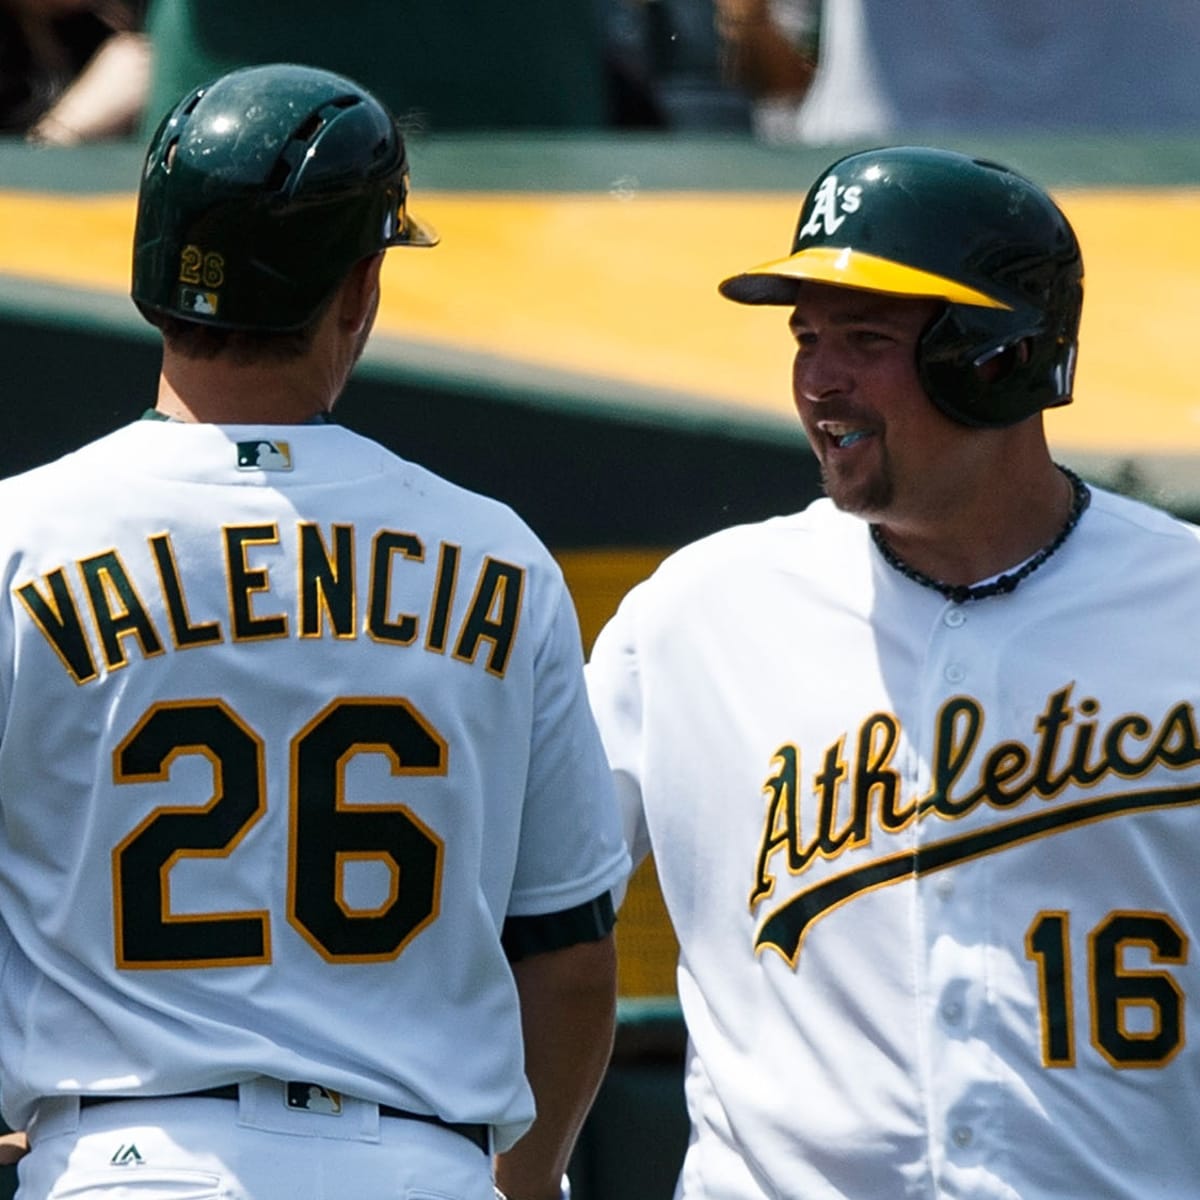 Billy Butler injured by Danny Valencia in altercation, reports SF